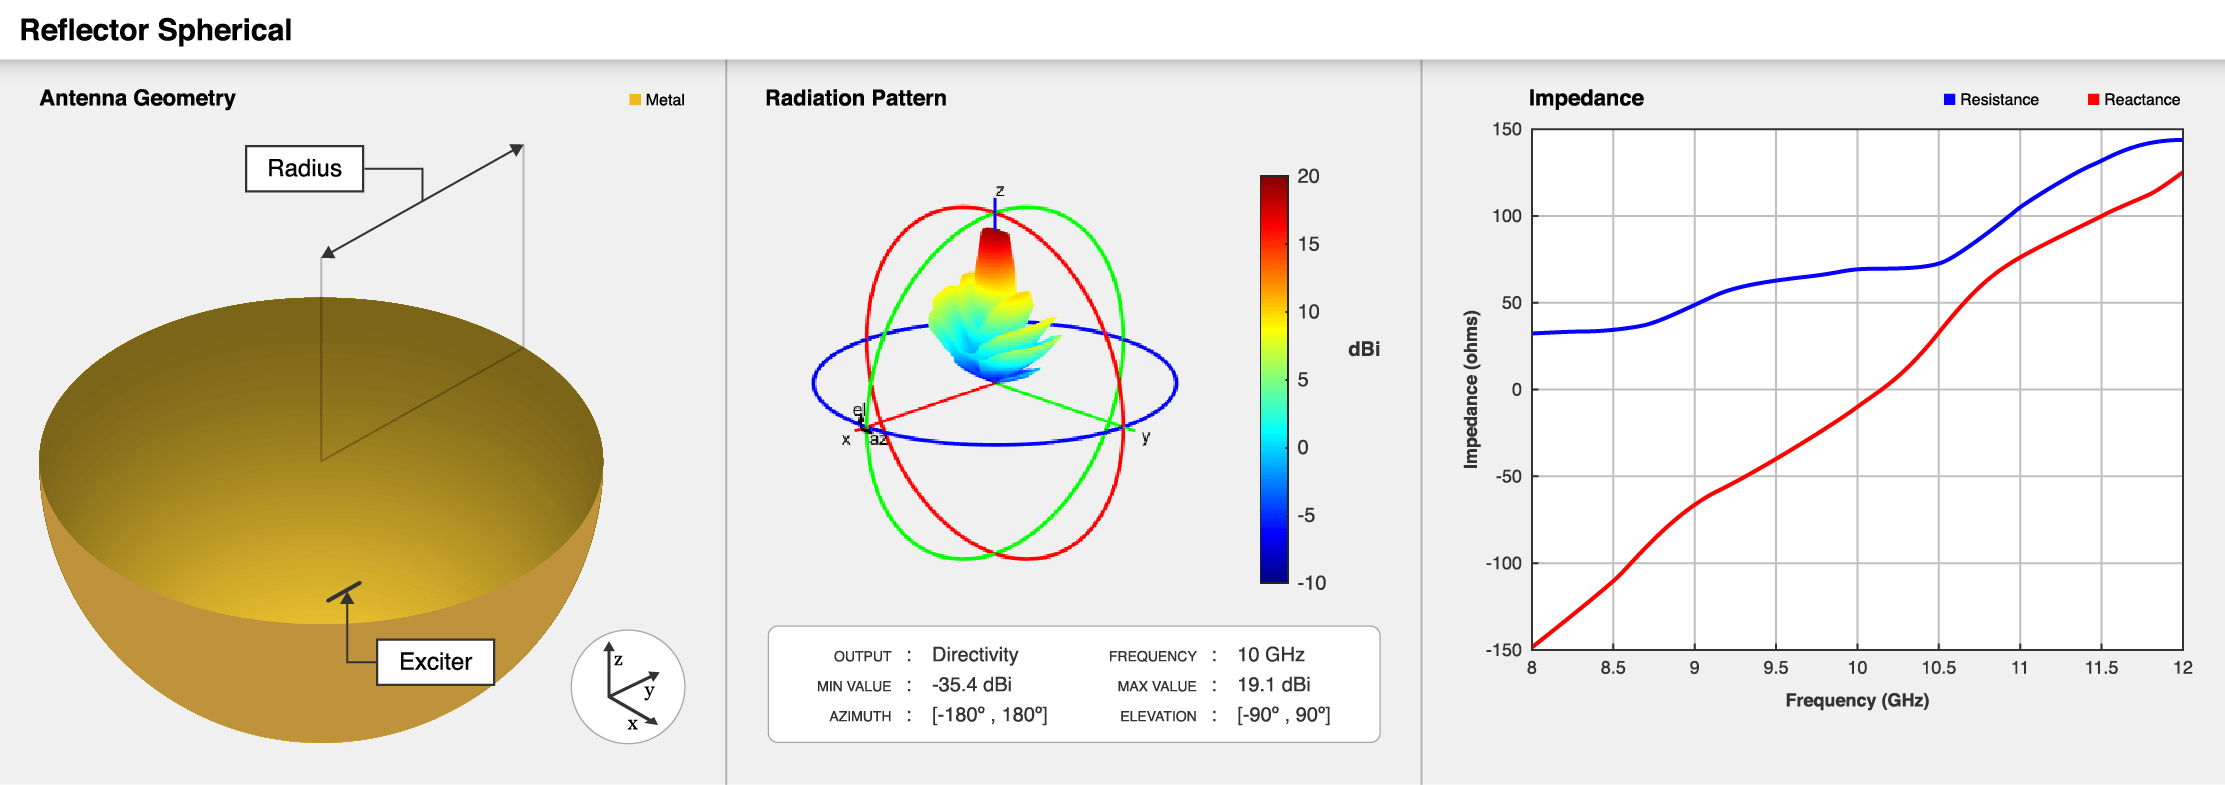 Spherical reflector antenna geometry, default radiation pattern, and impedance plot.